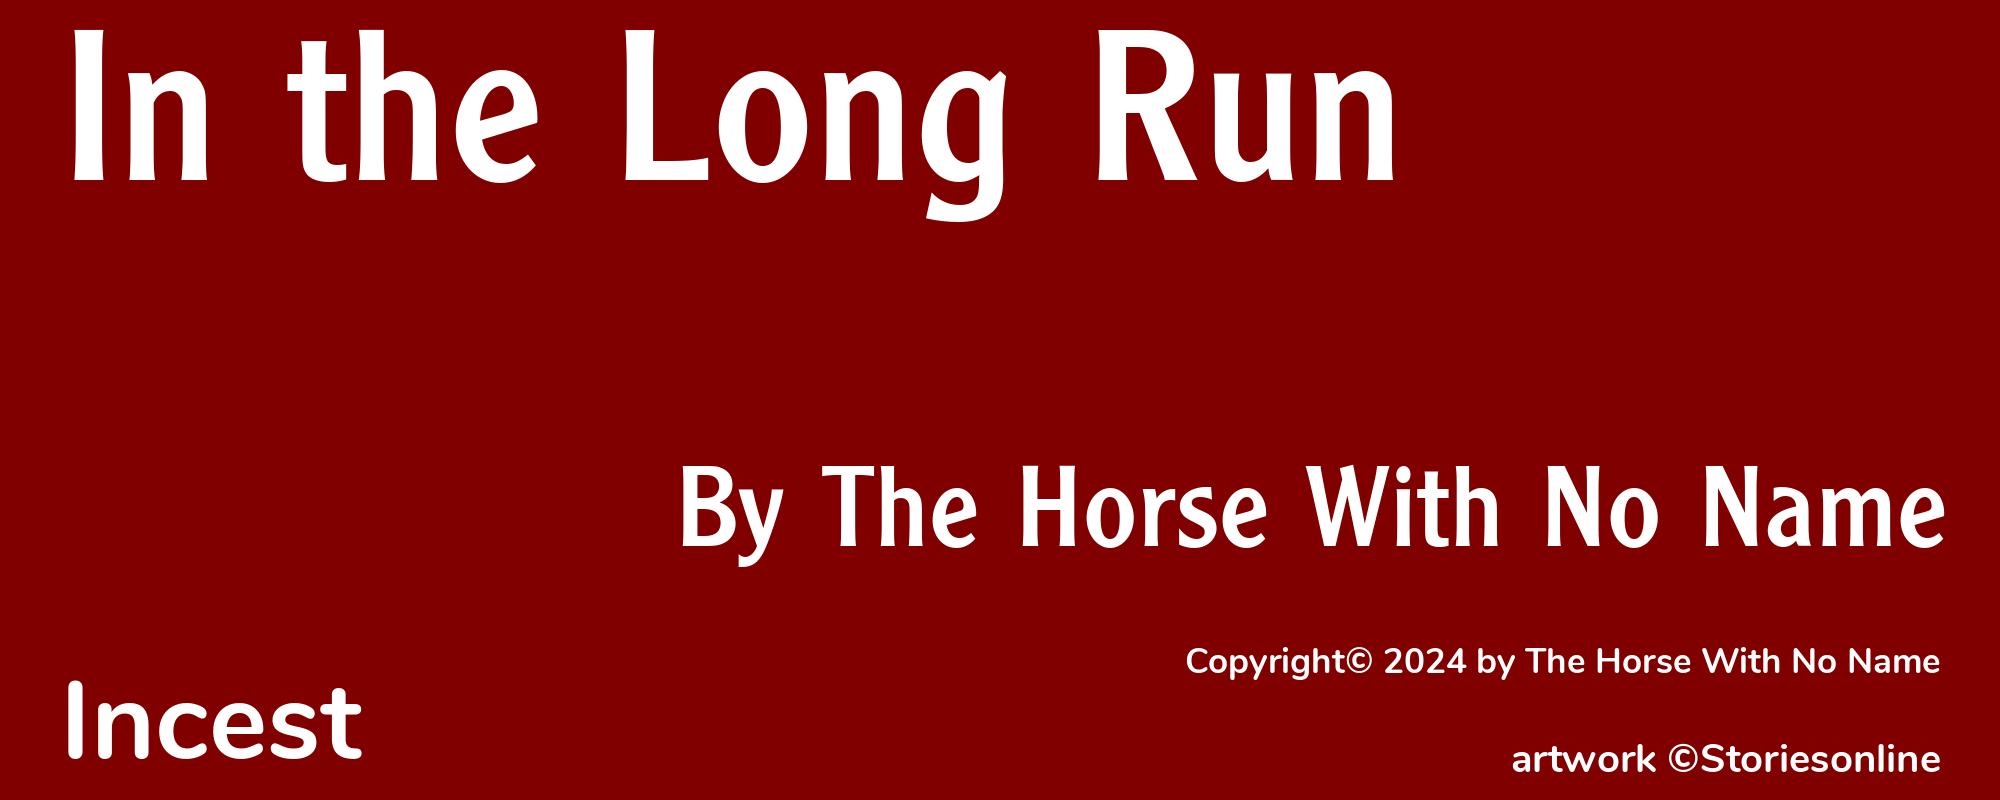 In the Long Run - Cover